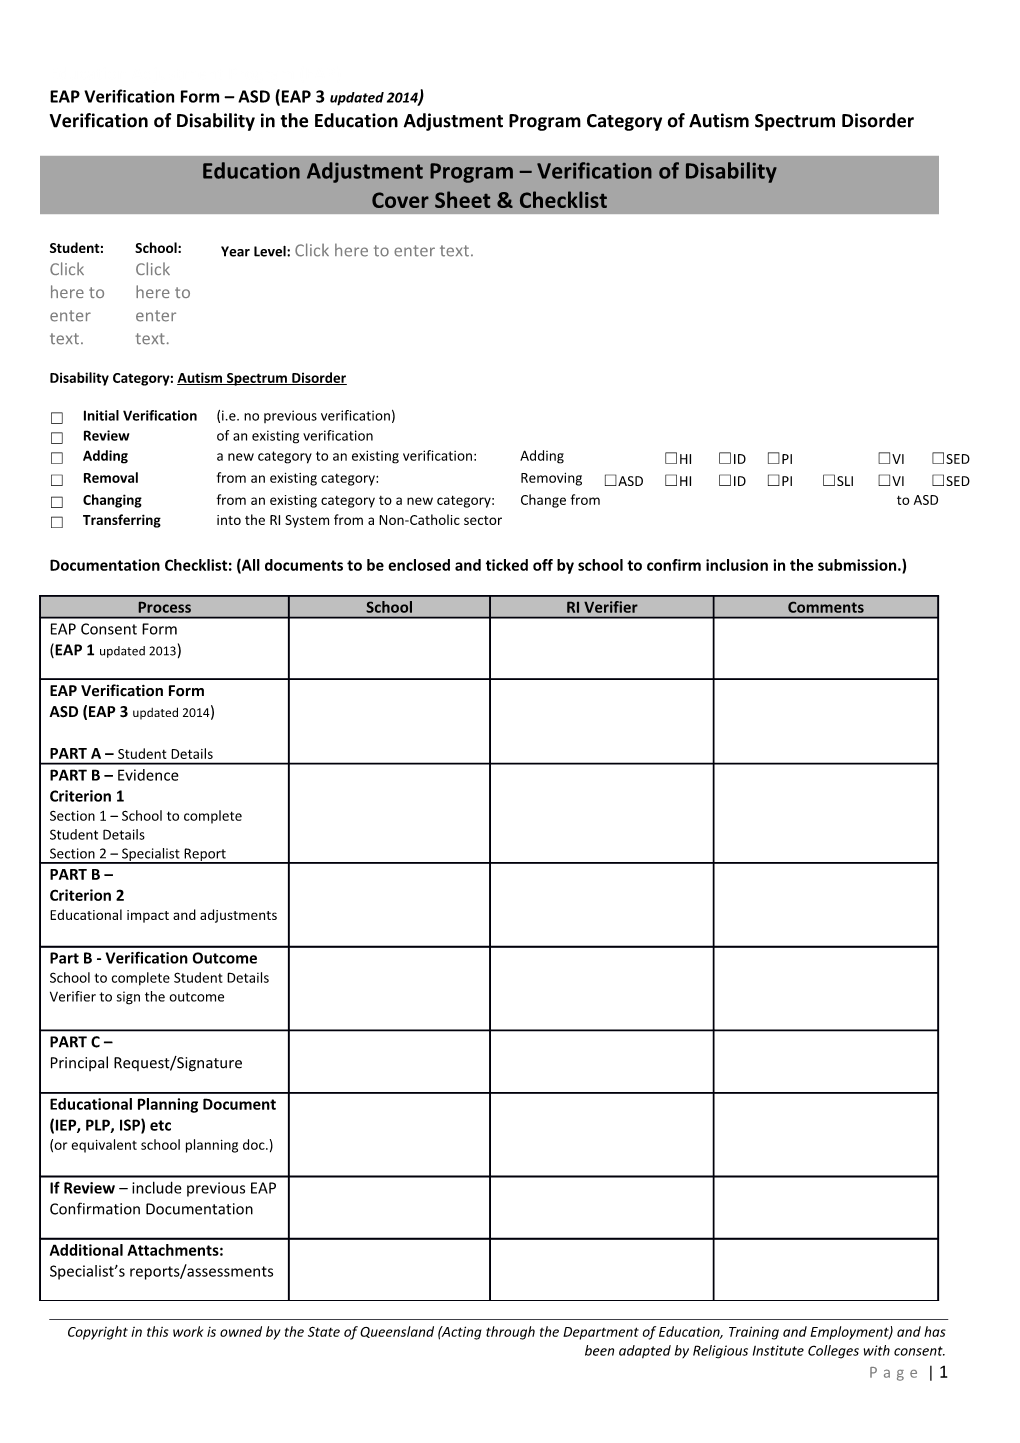 Documentation Checklist: (All Documents to Be Enclosed and Ticked Off by School to Confirm